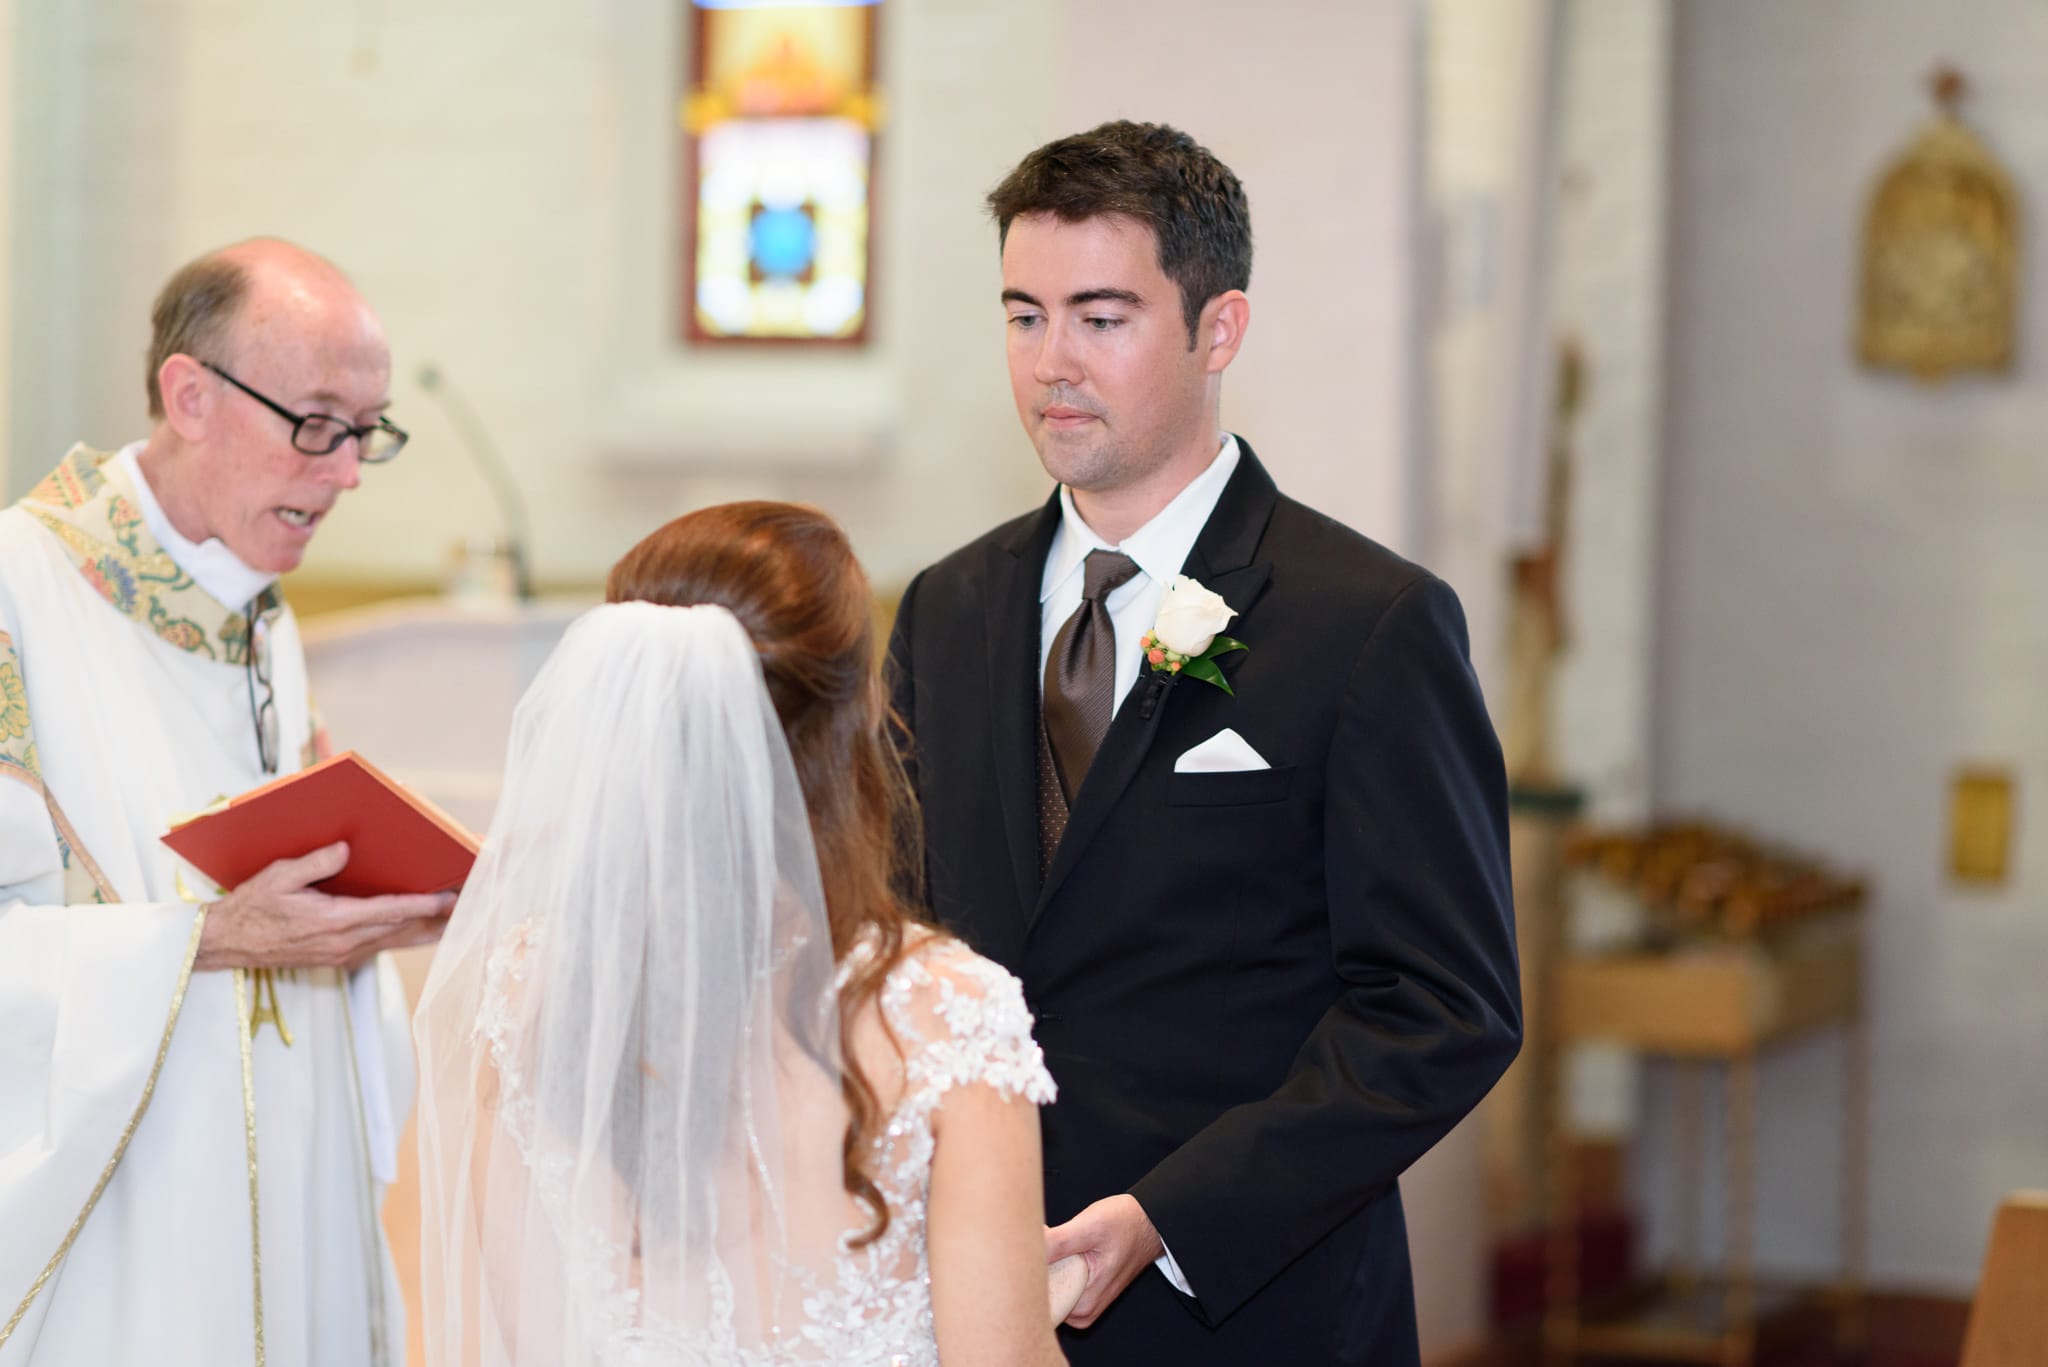 Groom looking at bride during vows - Historic Church downtown Georgetown